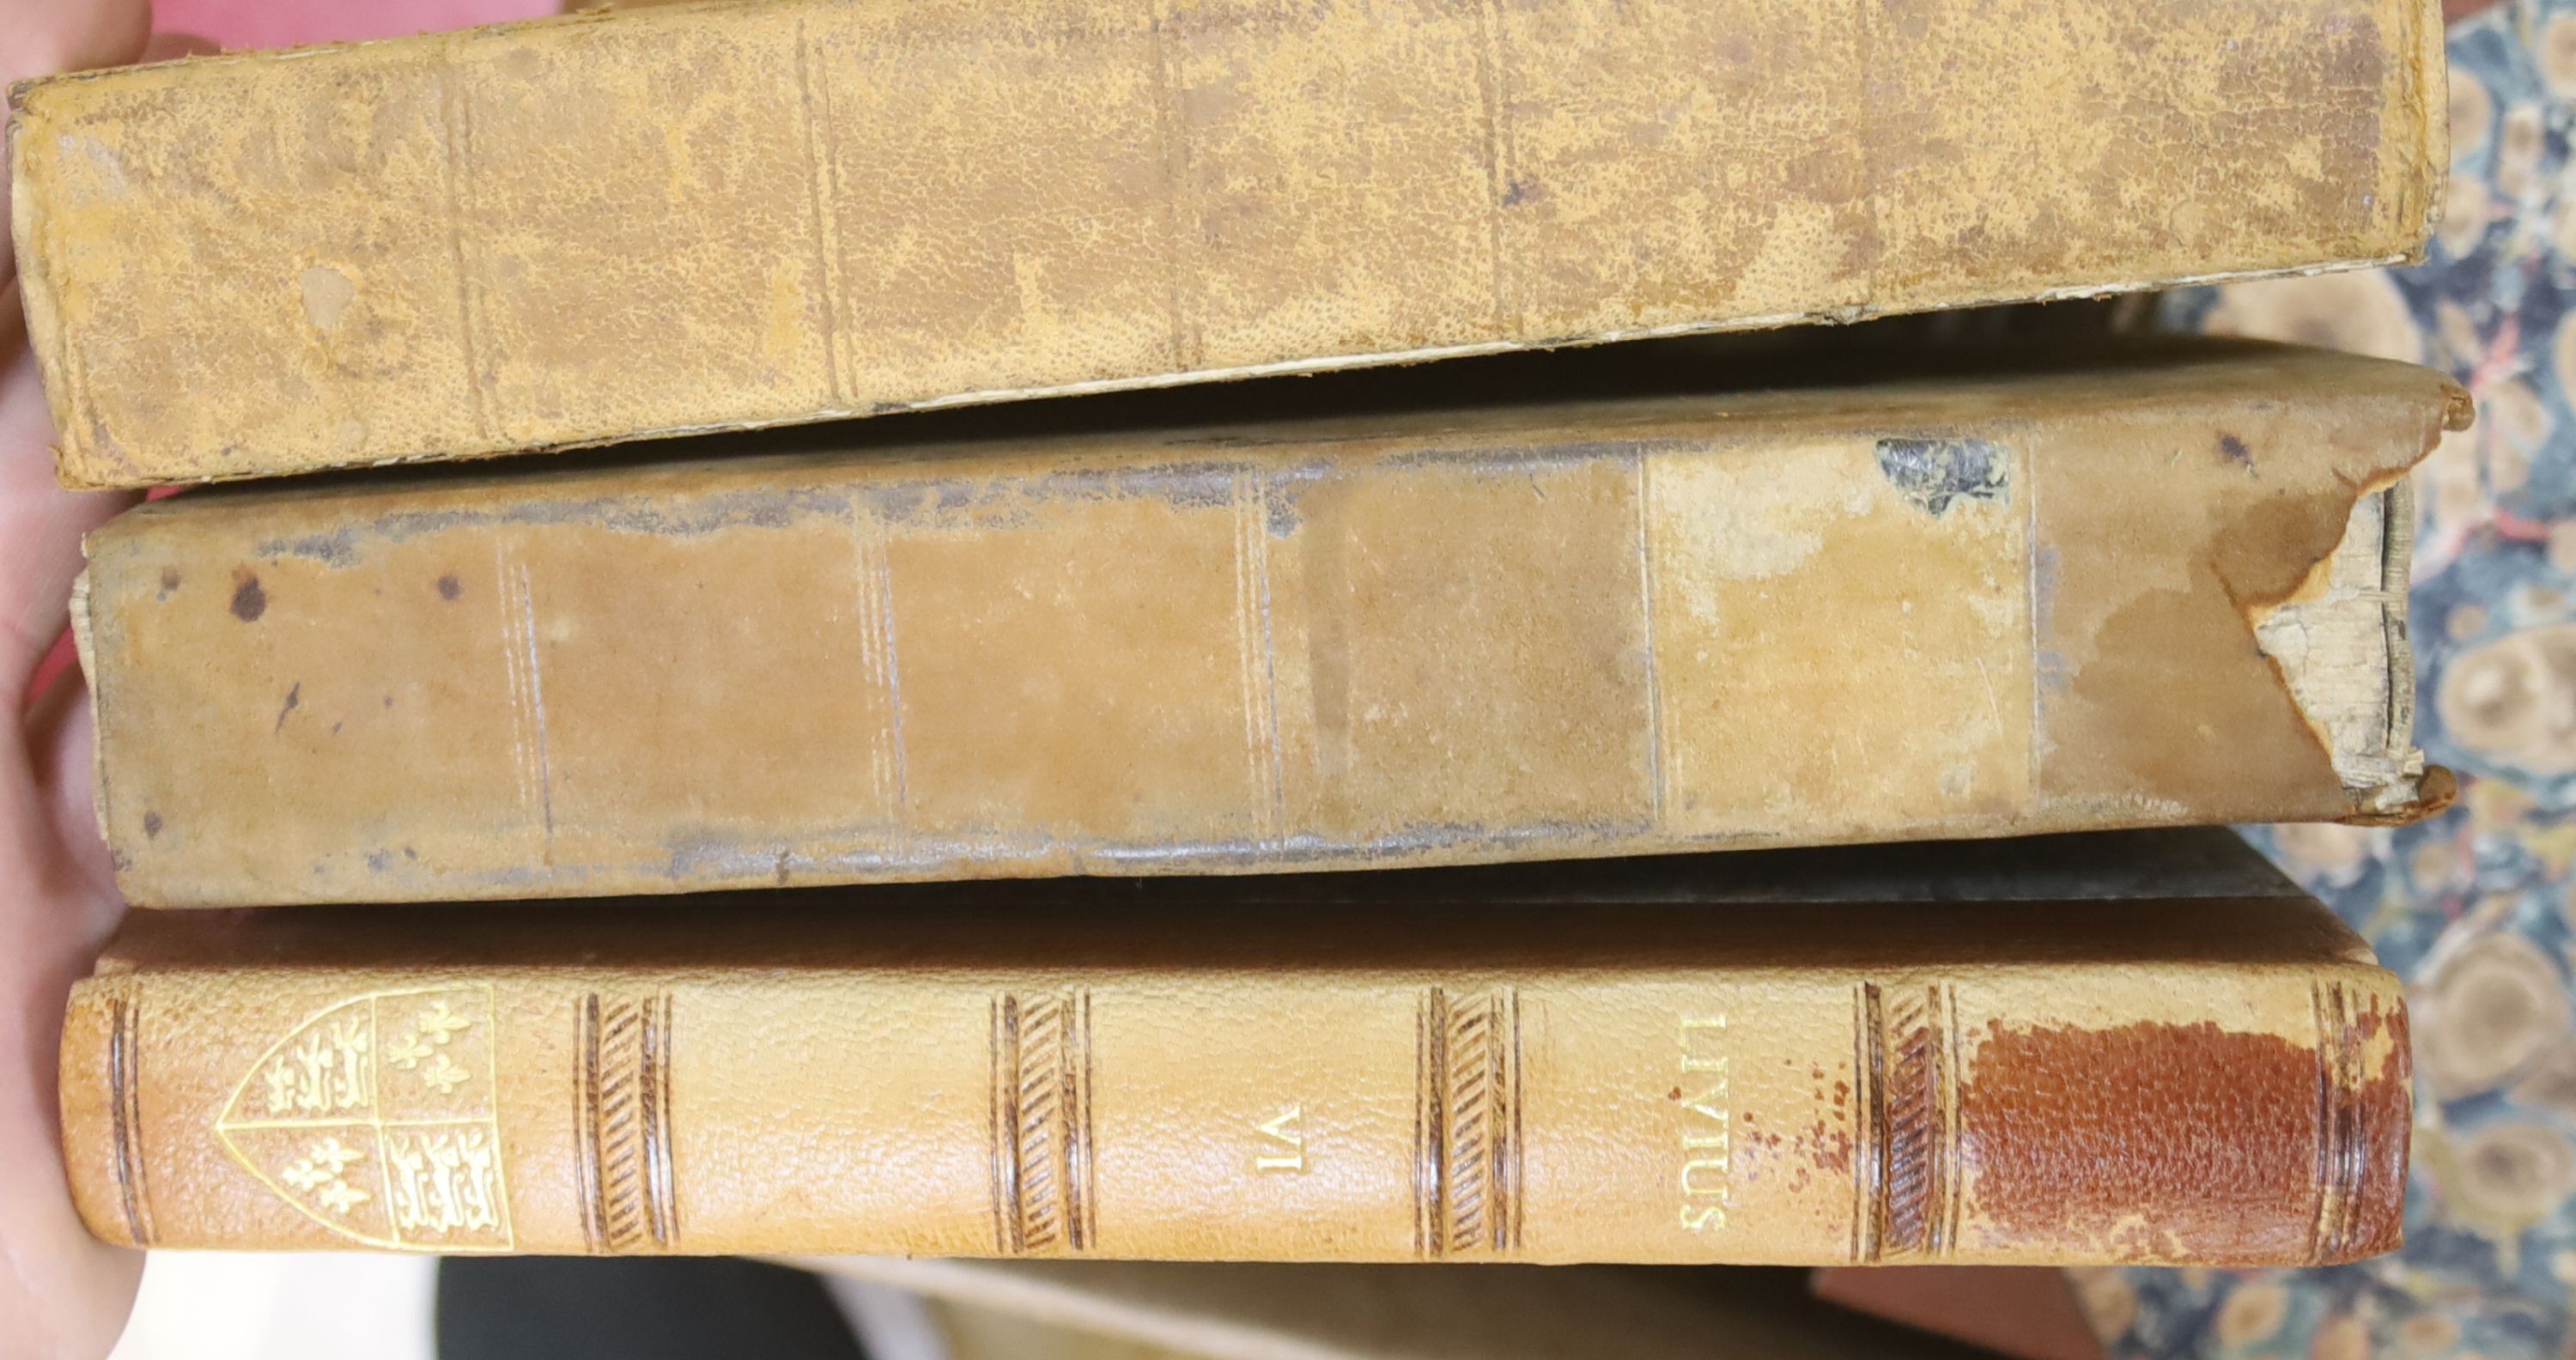 Antiquarian Books - Classics Editions, 18th and 19th centuries, various bindings (mostly leather), approx 60.